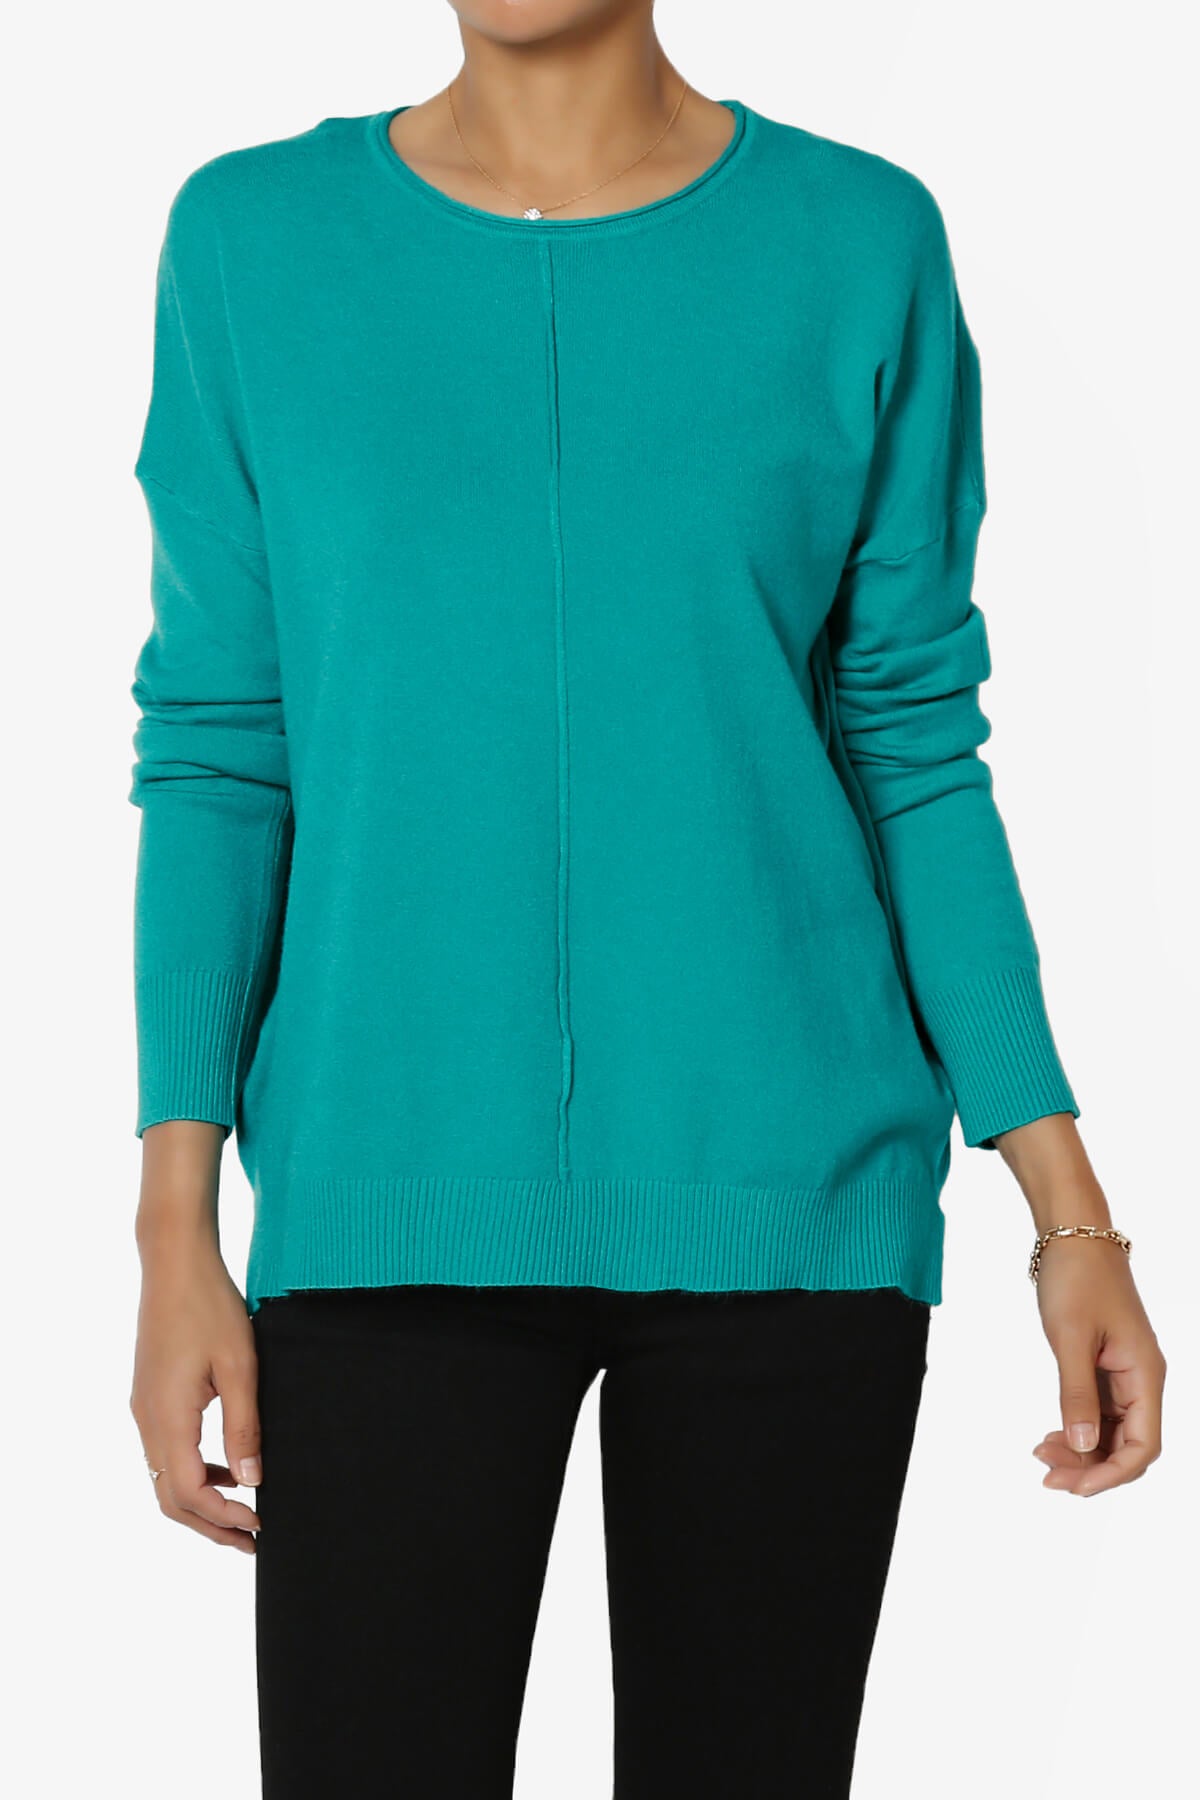 Carolina Long Sleeve Relaxed Fit Knit Top LT TEAL_1